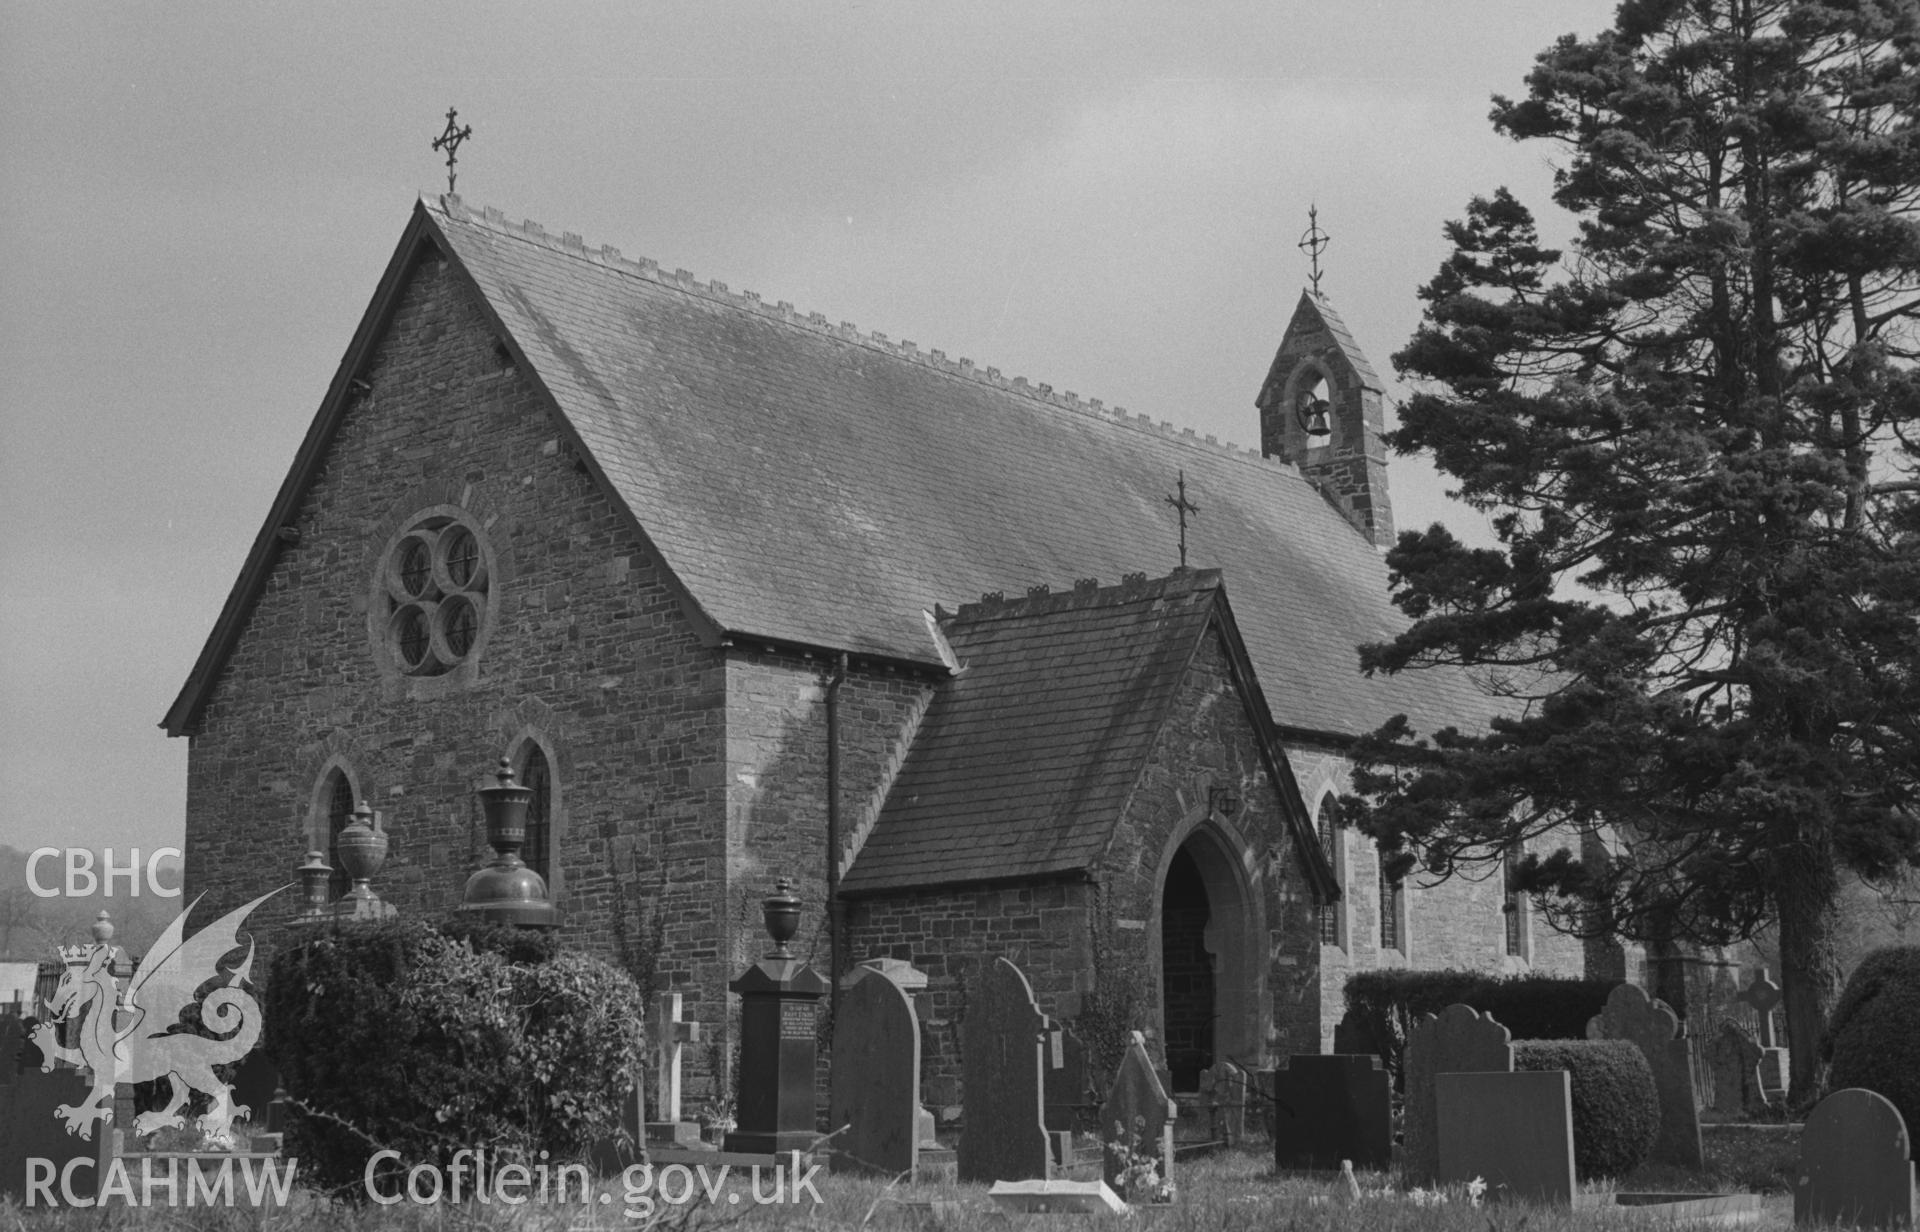 Digital copy of a black and white negative showing exterior view of St Hilary's Church, Trefilan. Photographed by Arthur O. Chater on 11th April 1967 looking north east from Grid Reference SN 549 572.